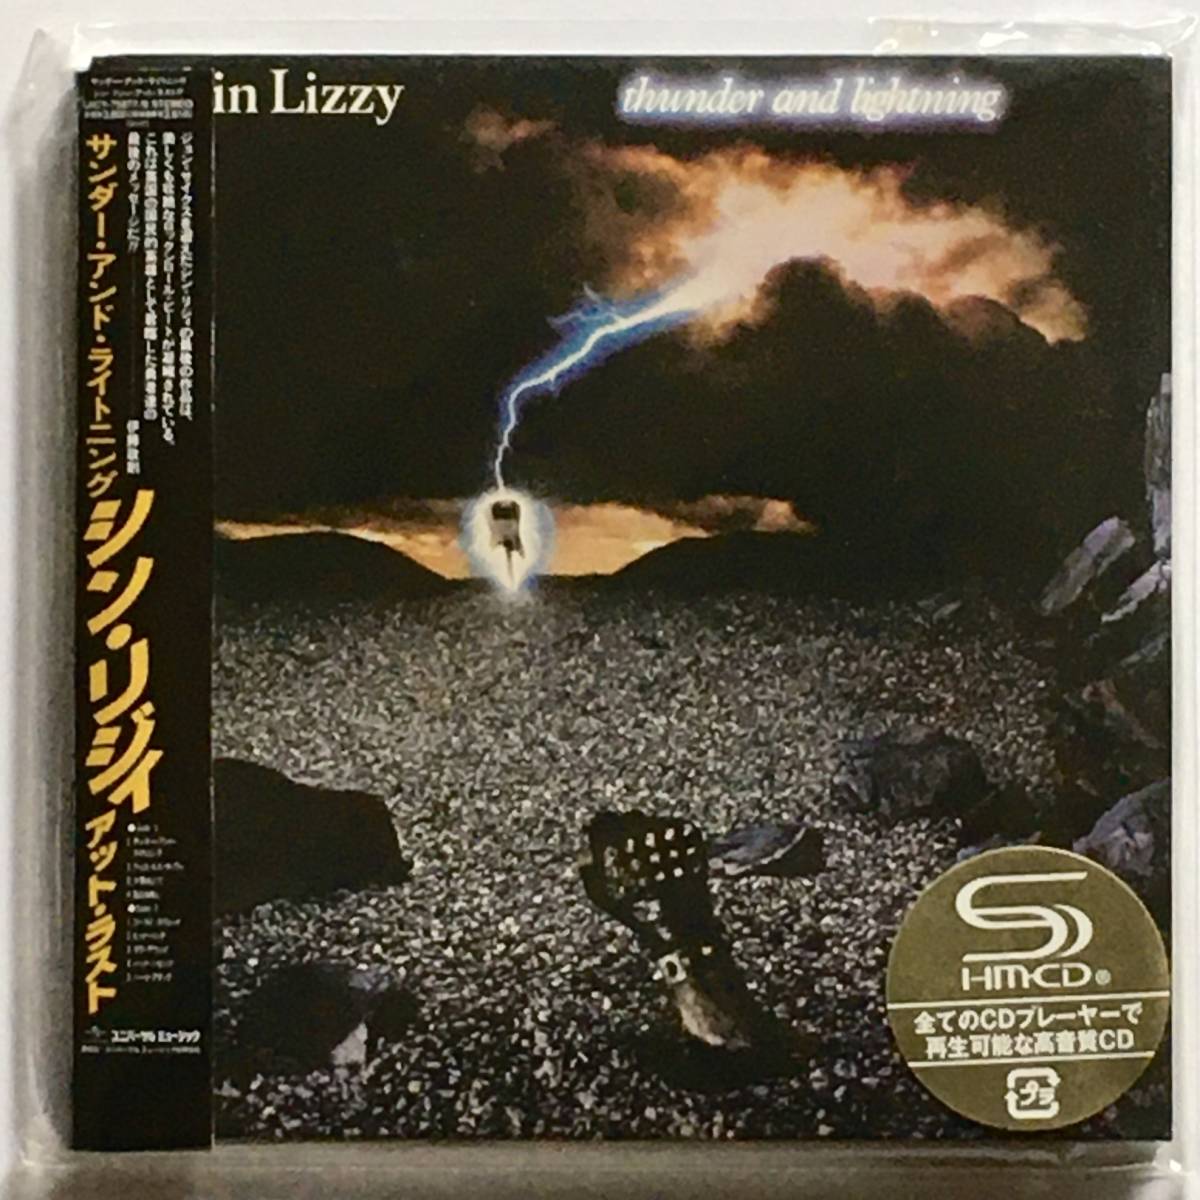 [ new goods CD]THIN LIZZY[THUNDER AND LIGHTNING]DELUXE EDITION JAPAN SHM-CD 2DISCS PAPER SLEEVE LIMITED EDITION BRAND NEW unopened new goods!!